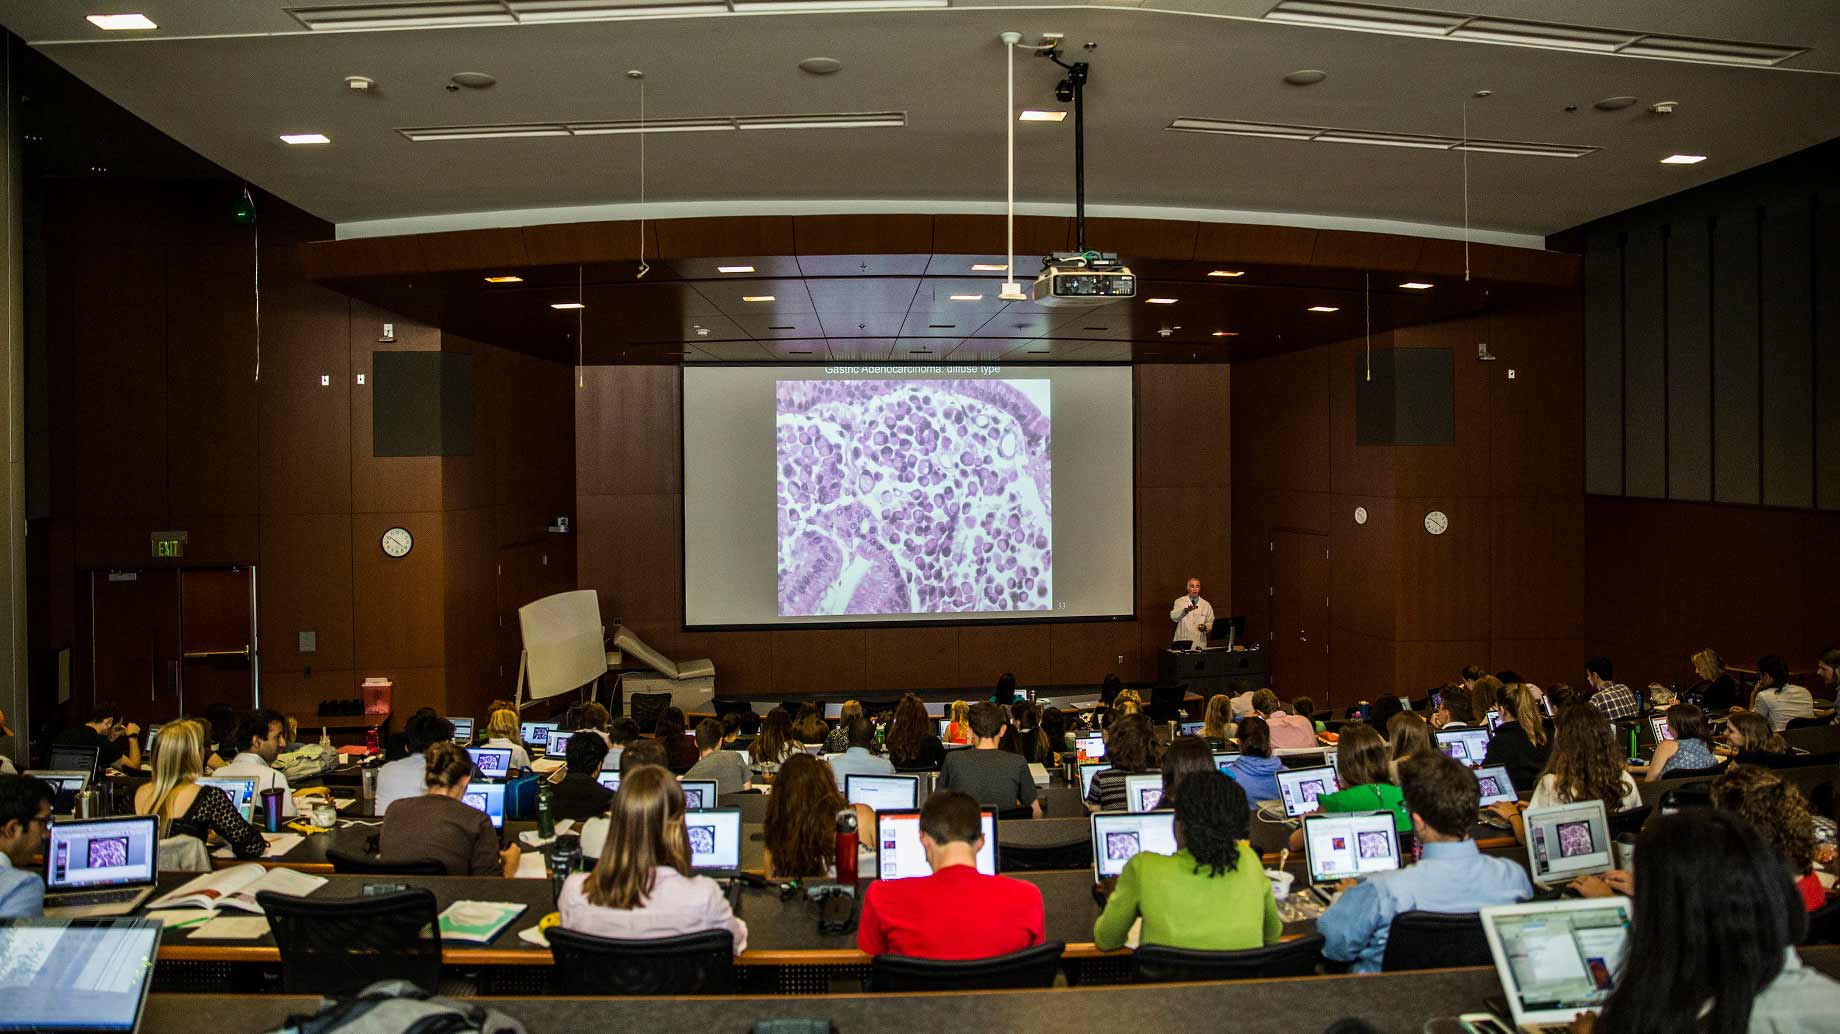 medical students viewing a projected slide in a large classroom